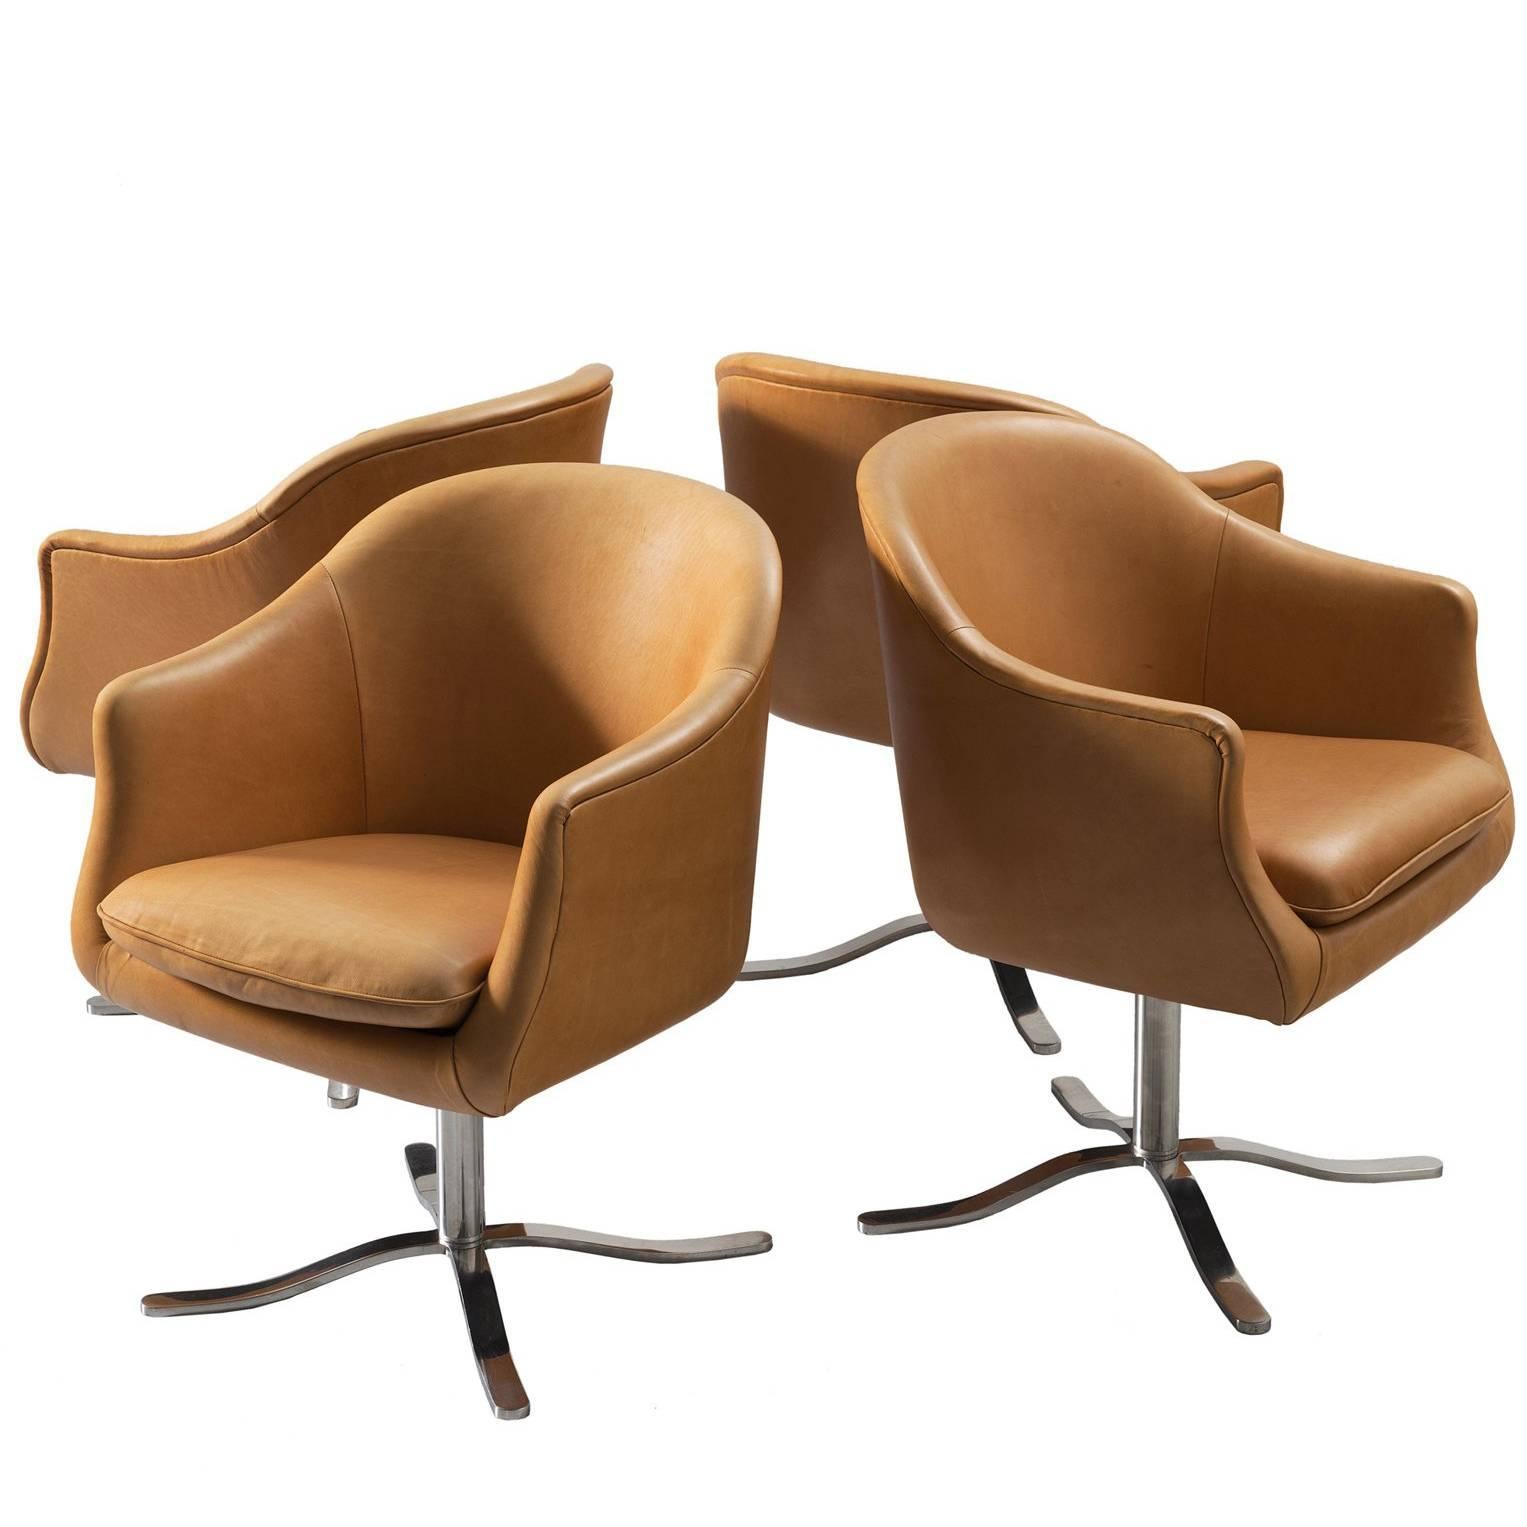 Set of Four Reupholstered Swivel Bucket Chairs in Cognac Leather